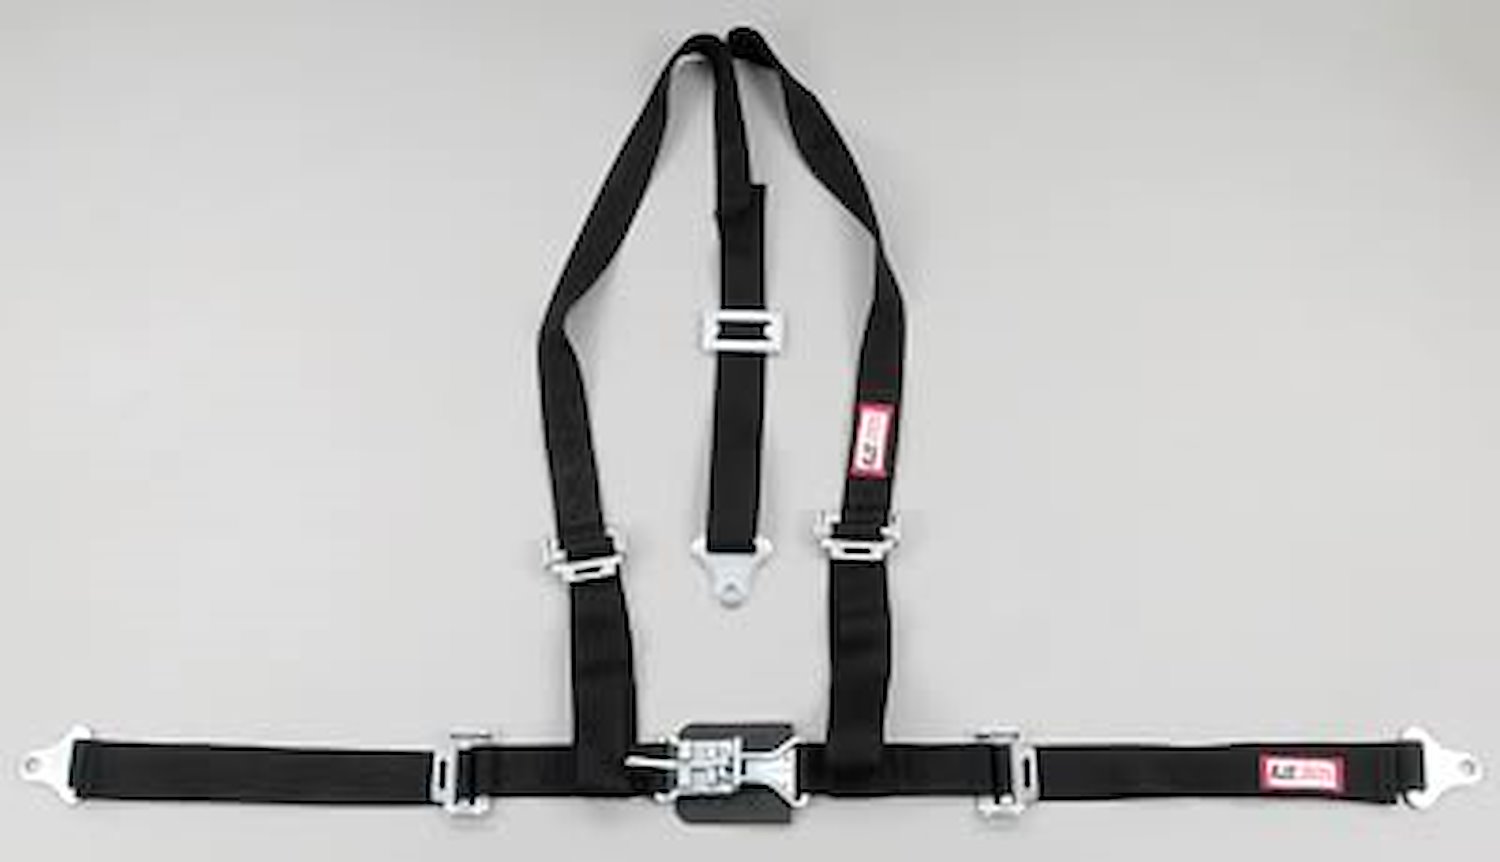 NON-SFI L&L HARNESS 3 PULL DOWN Lap Belt w/adjuster 2 S.H. Y FLOOR Mount ALL WRAP ENDS YELLOW